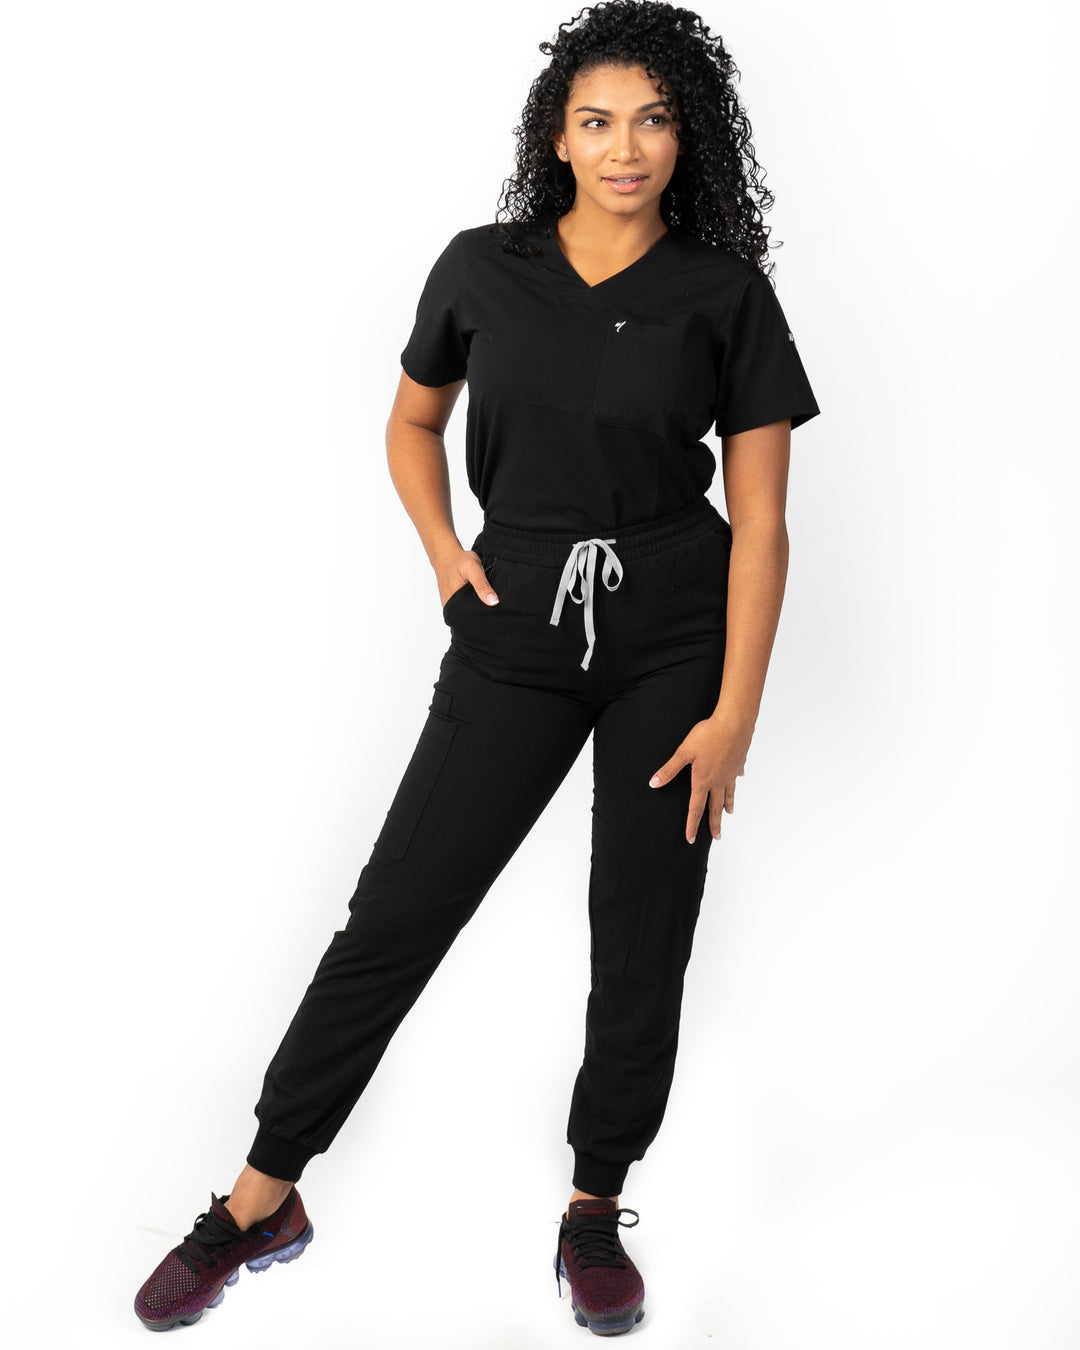 Scrubmates Modern Fit Black Jogger Scrub Pants with Pockets for Women